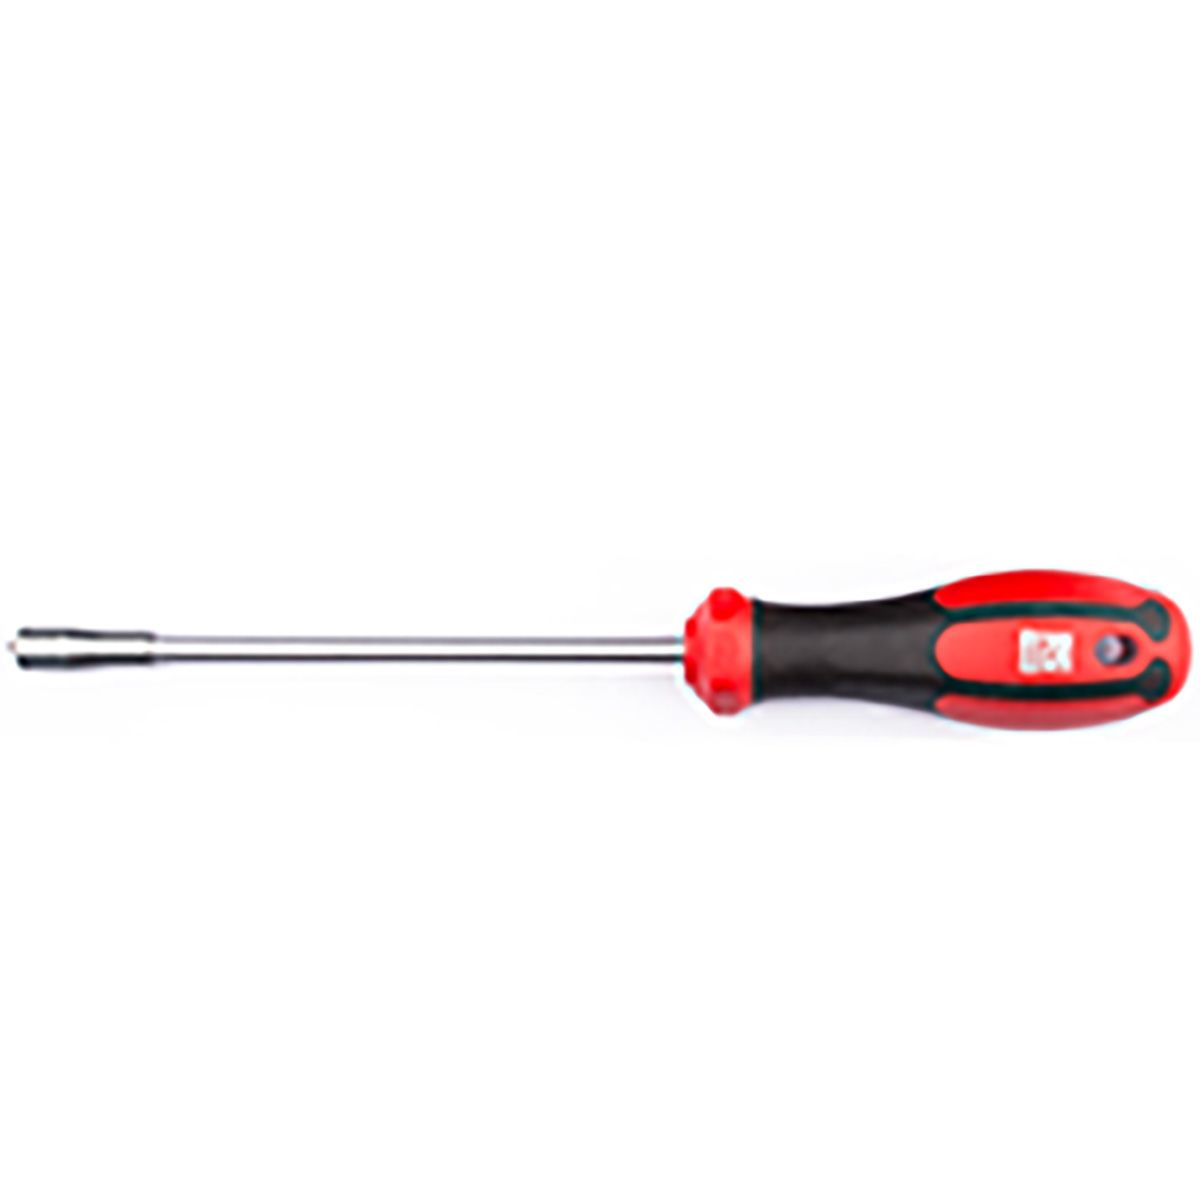 RS PRO Slotted Gripping Driver Screwdriver 6.0 mm Tip